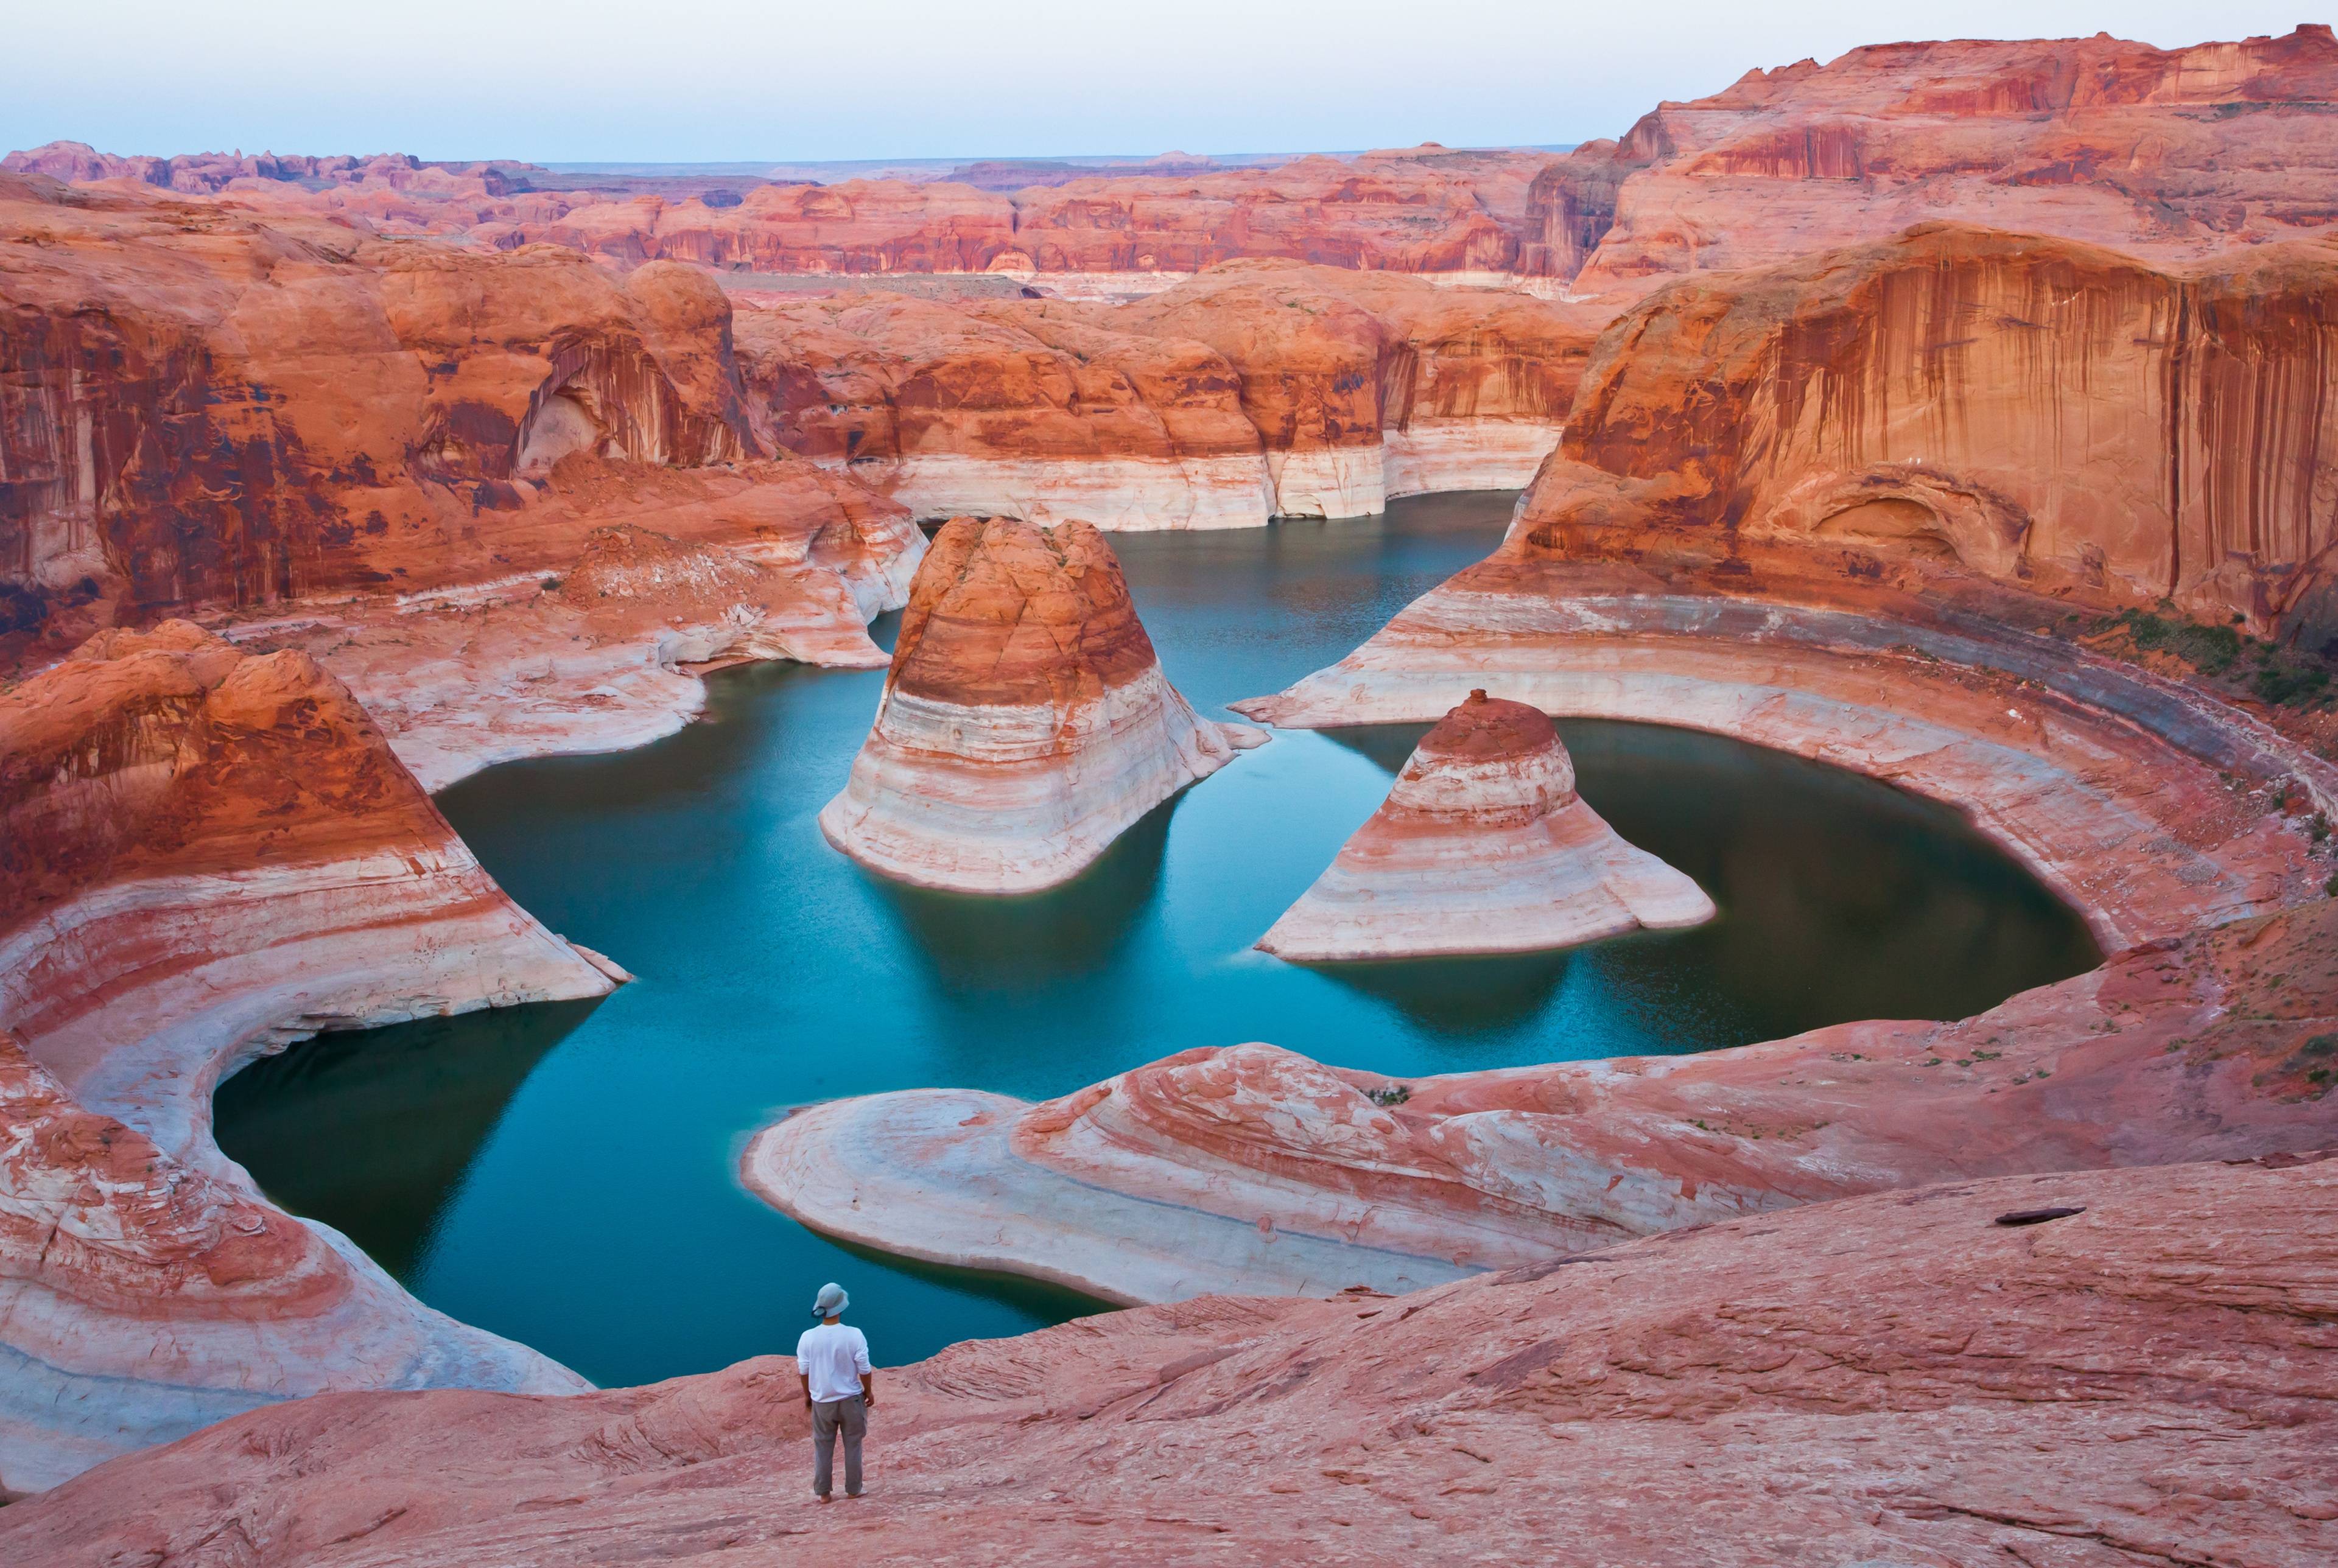 Travel Through Arizona, Utah and Nevada and see the Natural Wonders of the Southwest